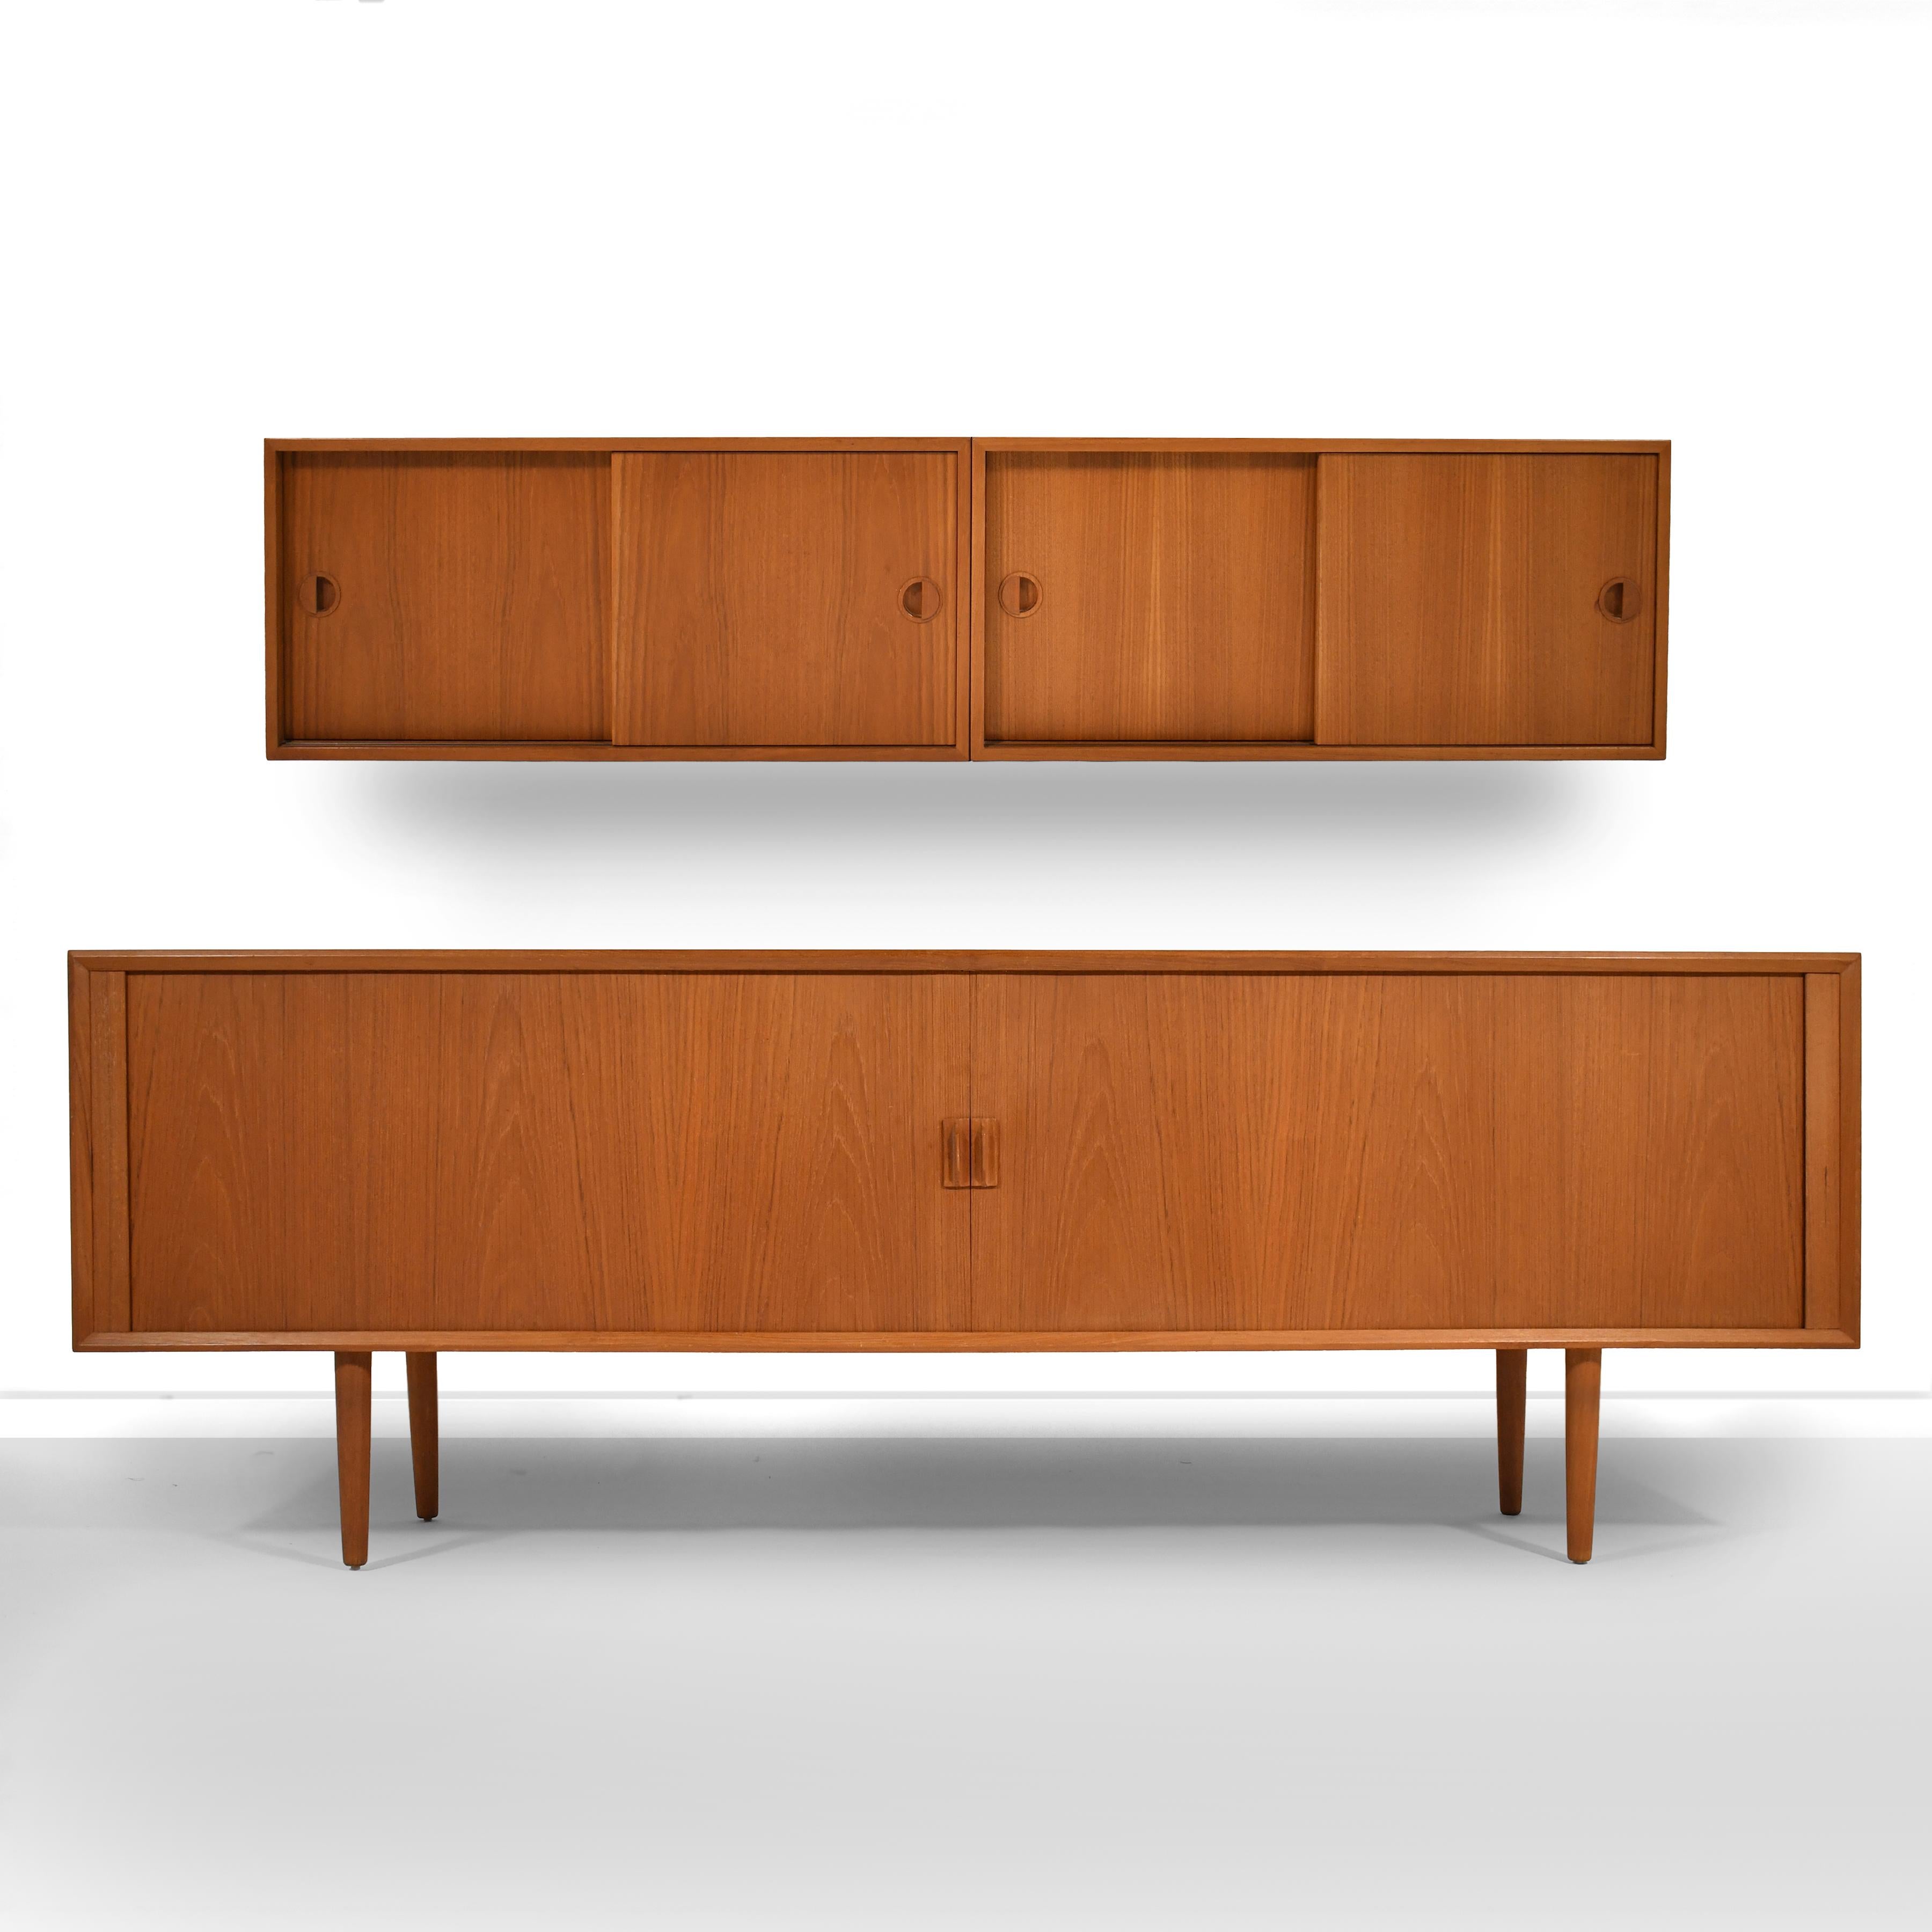 Pair of Teak Wall-Mounted Cabinets by HG Furniture 1